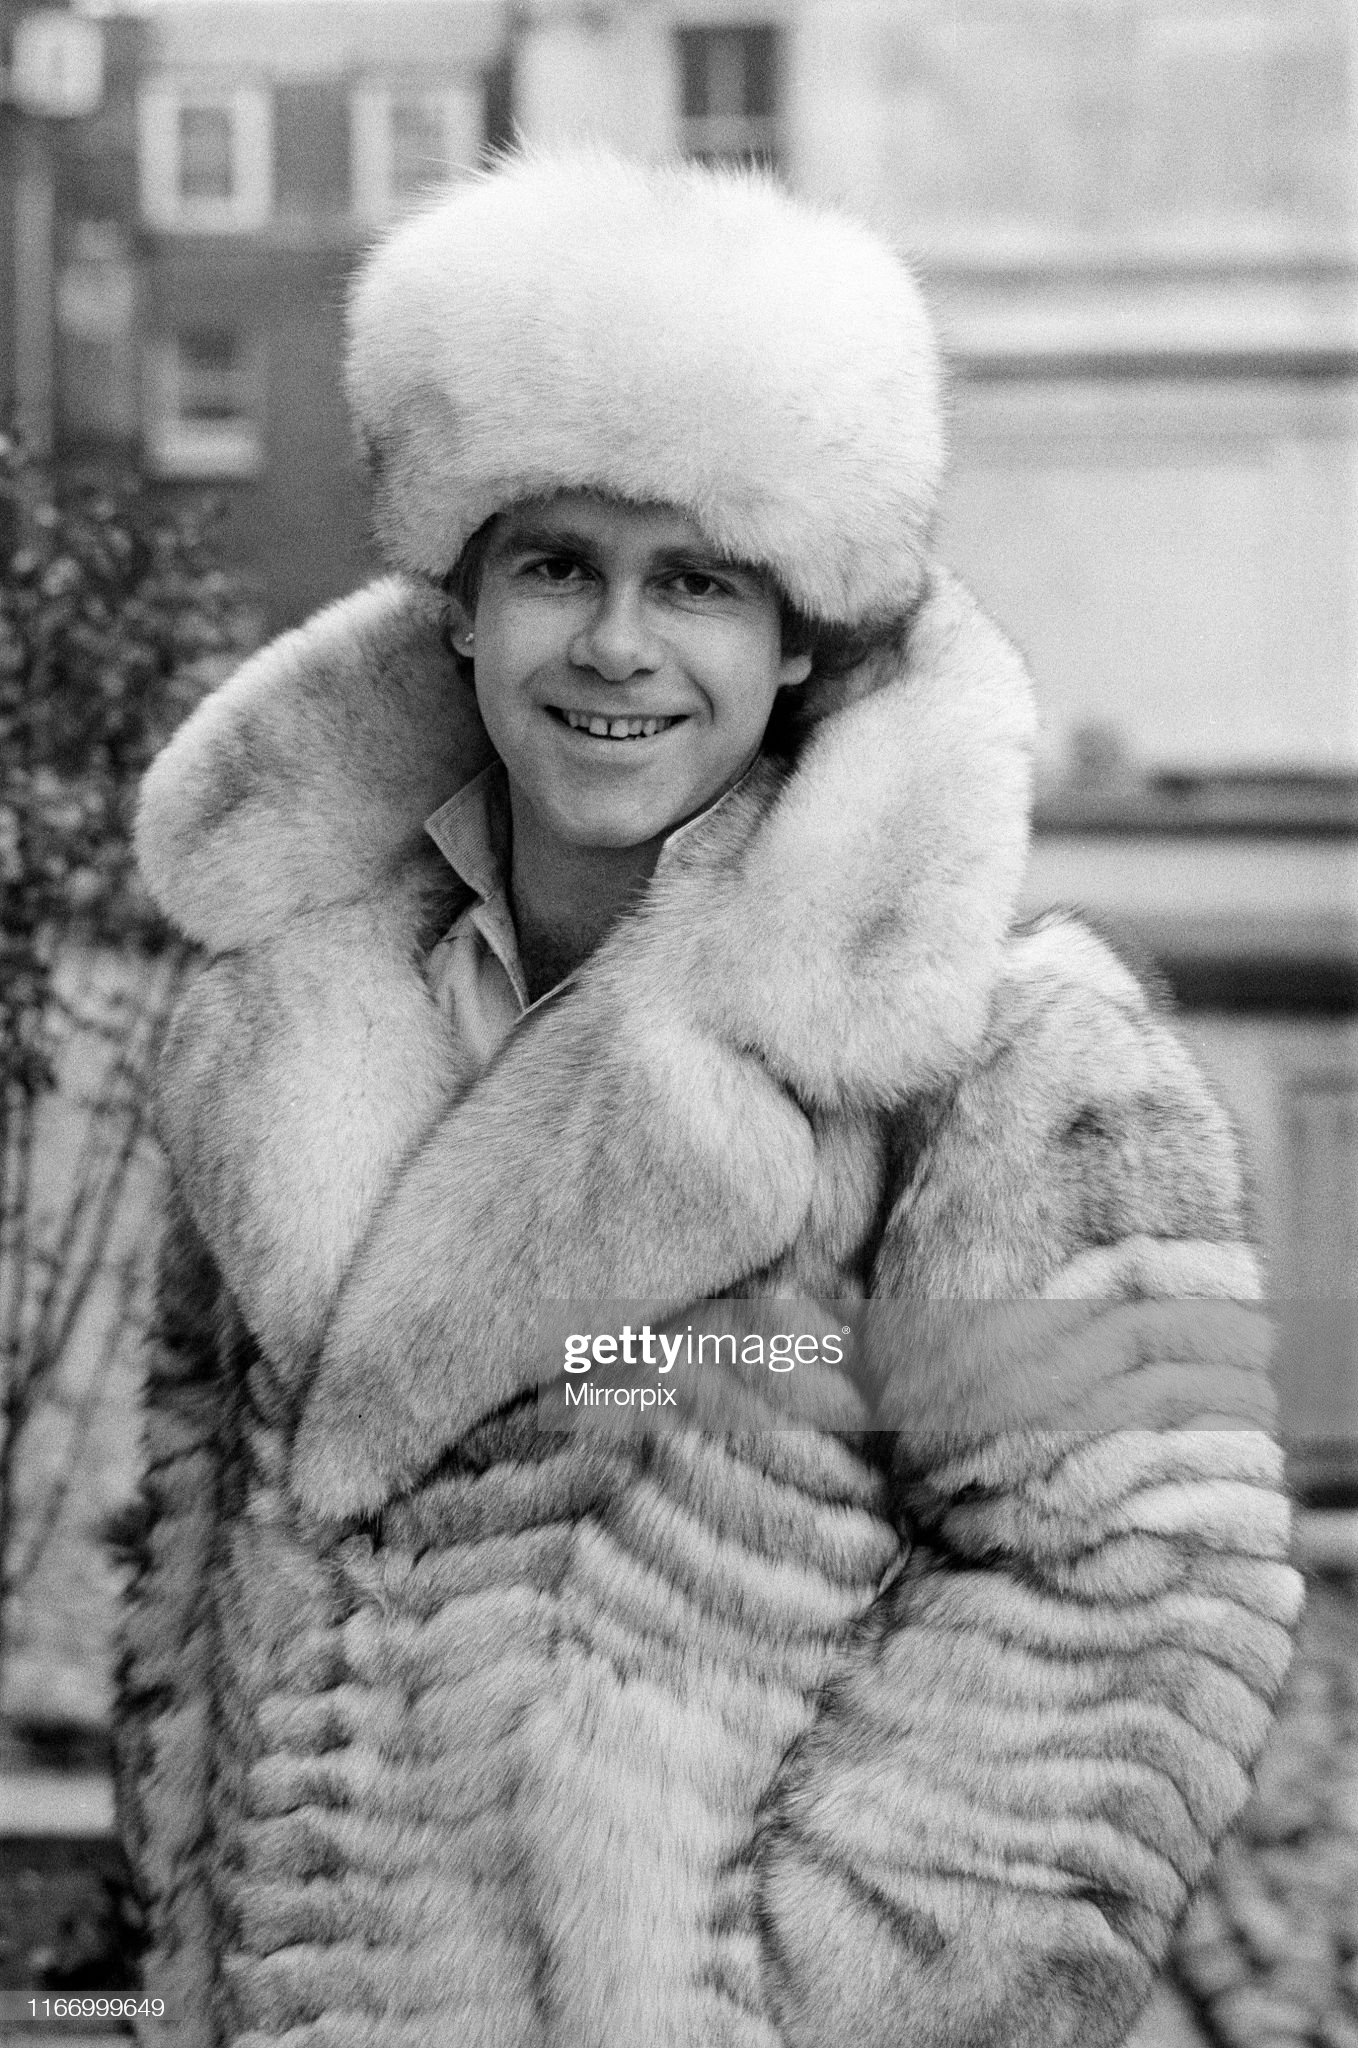 elton-john-pictured-at-the-inn-on-the-park-london-30th-october-1978-picture-id1166999649